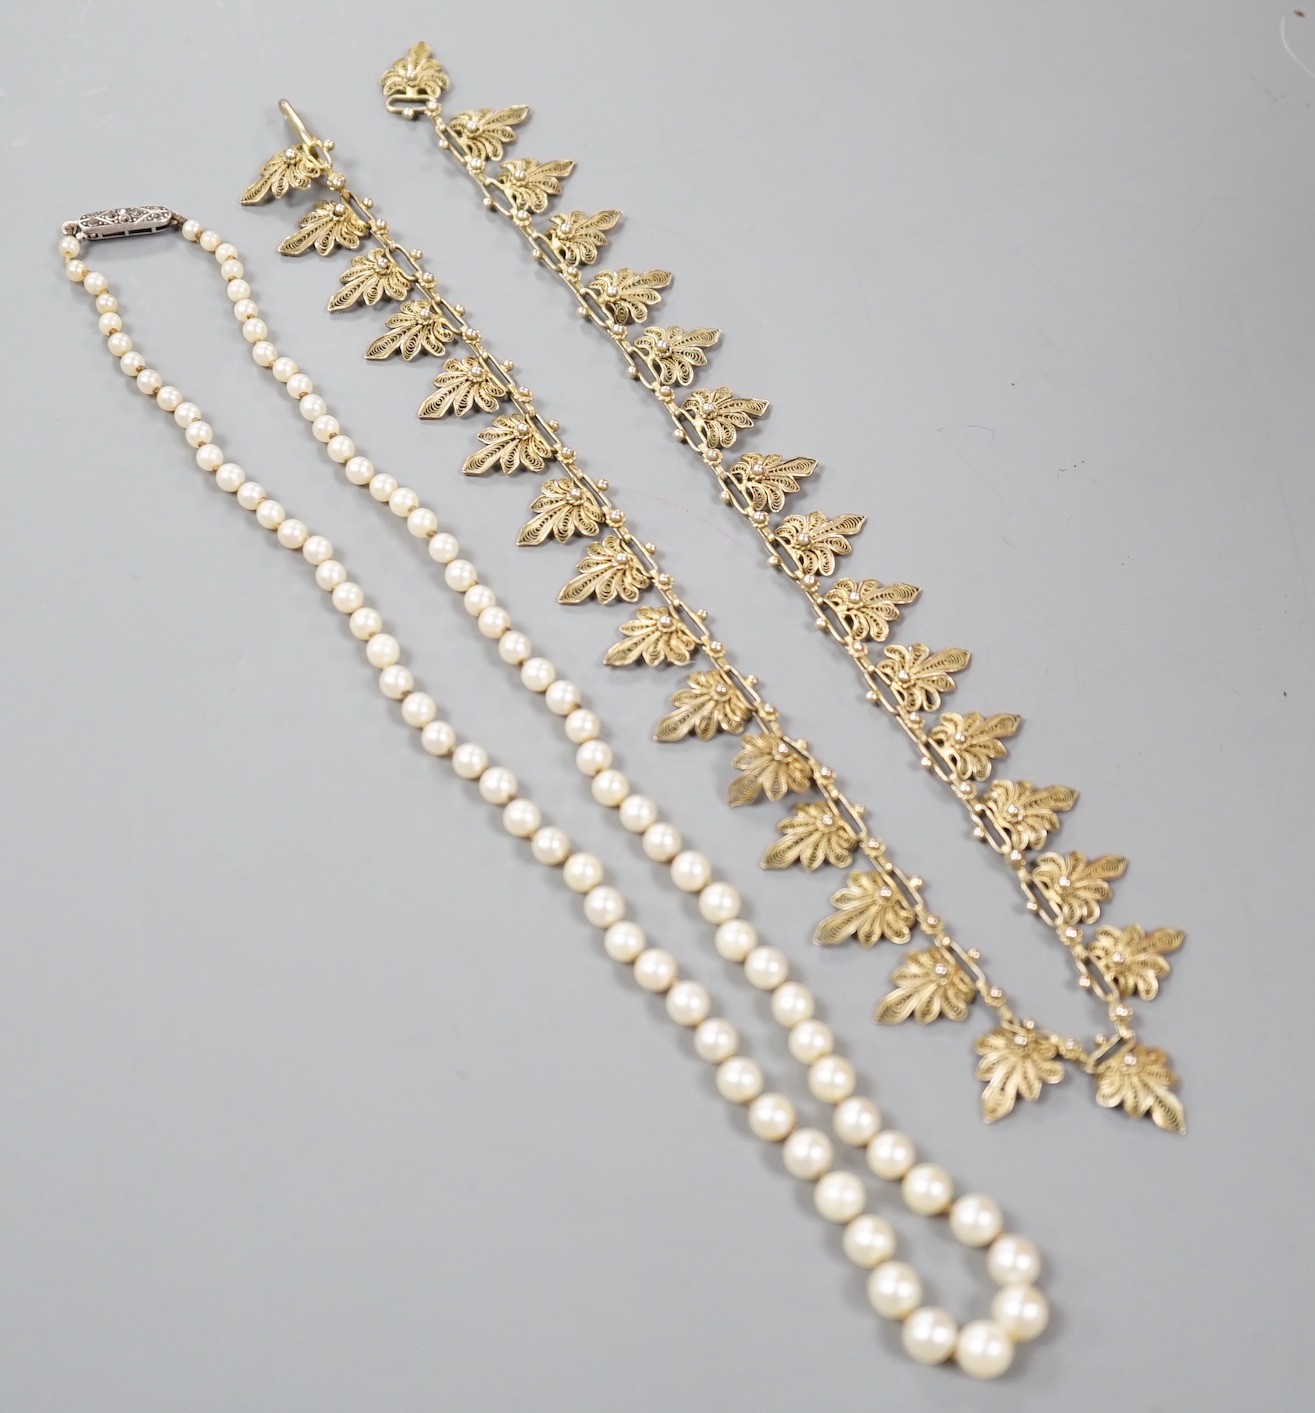 A single strand graduated cultured pearl necklace, with 925 clasp, 21cm and a gilt white metal filigree necklace.